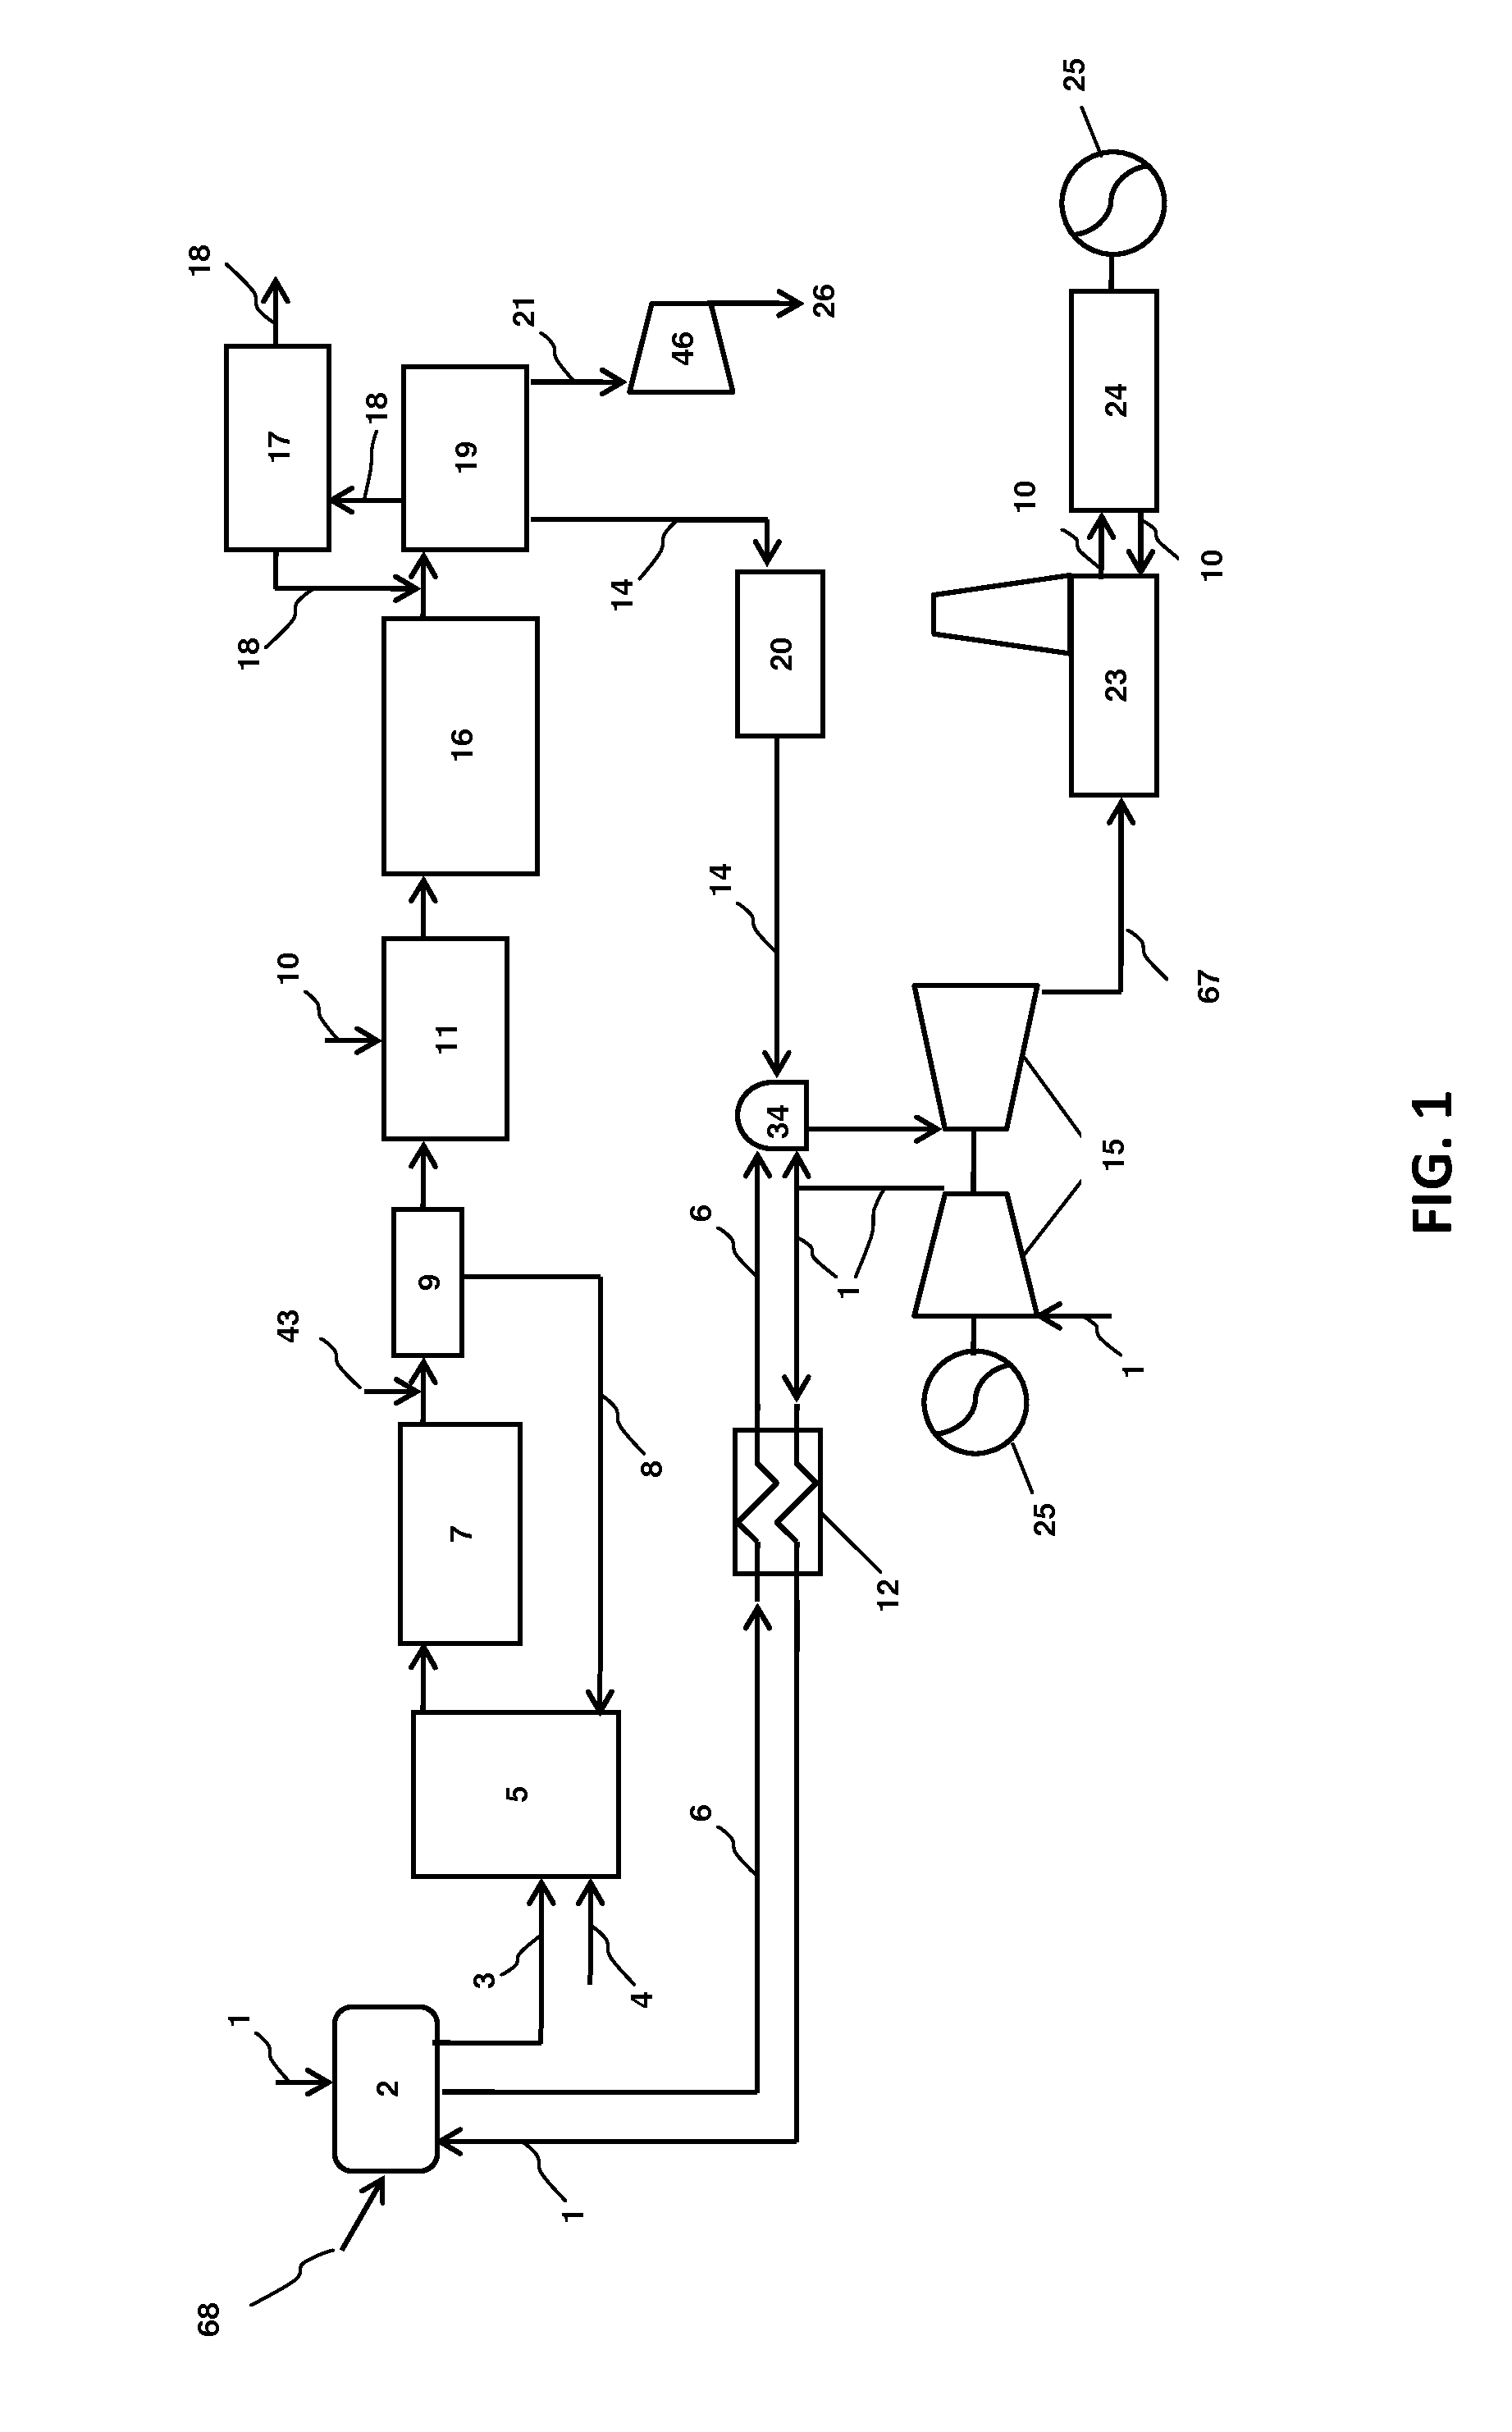 Efficient Low Rank Coal Gasification, Combustion, and Processing Systems and Methods